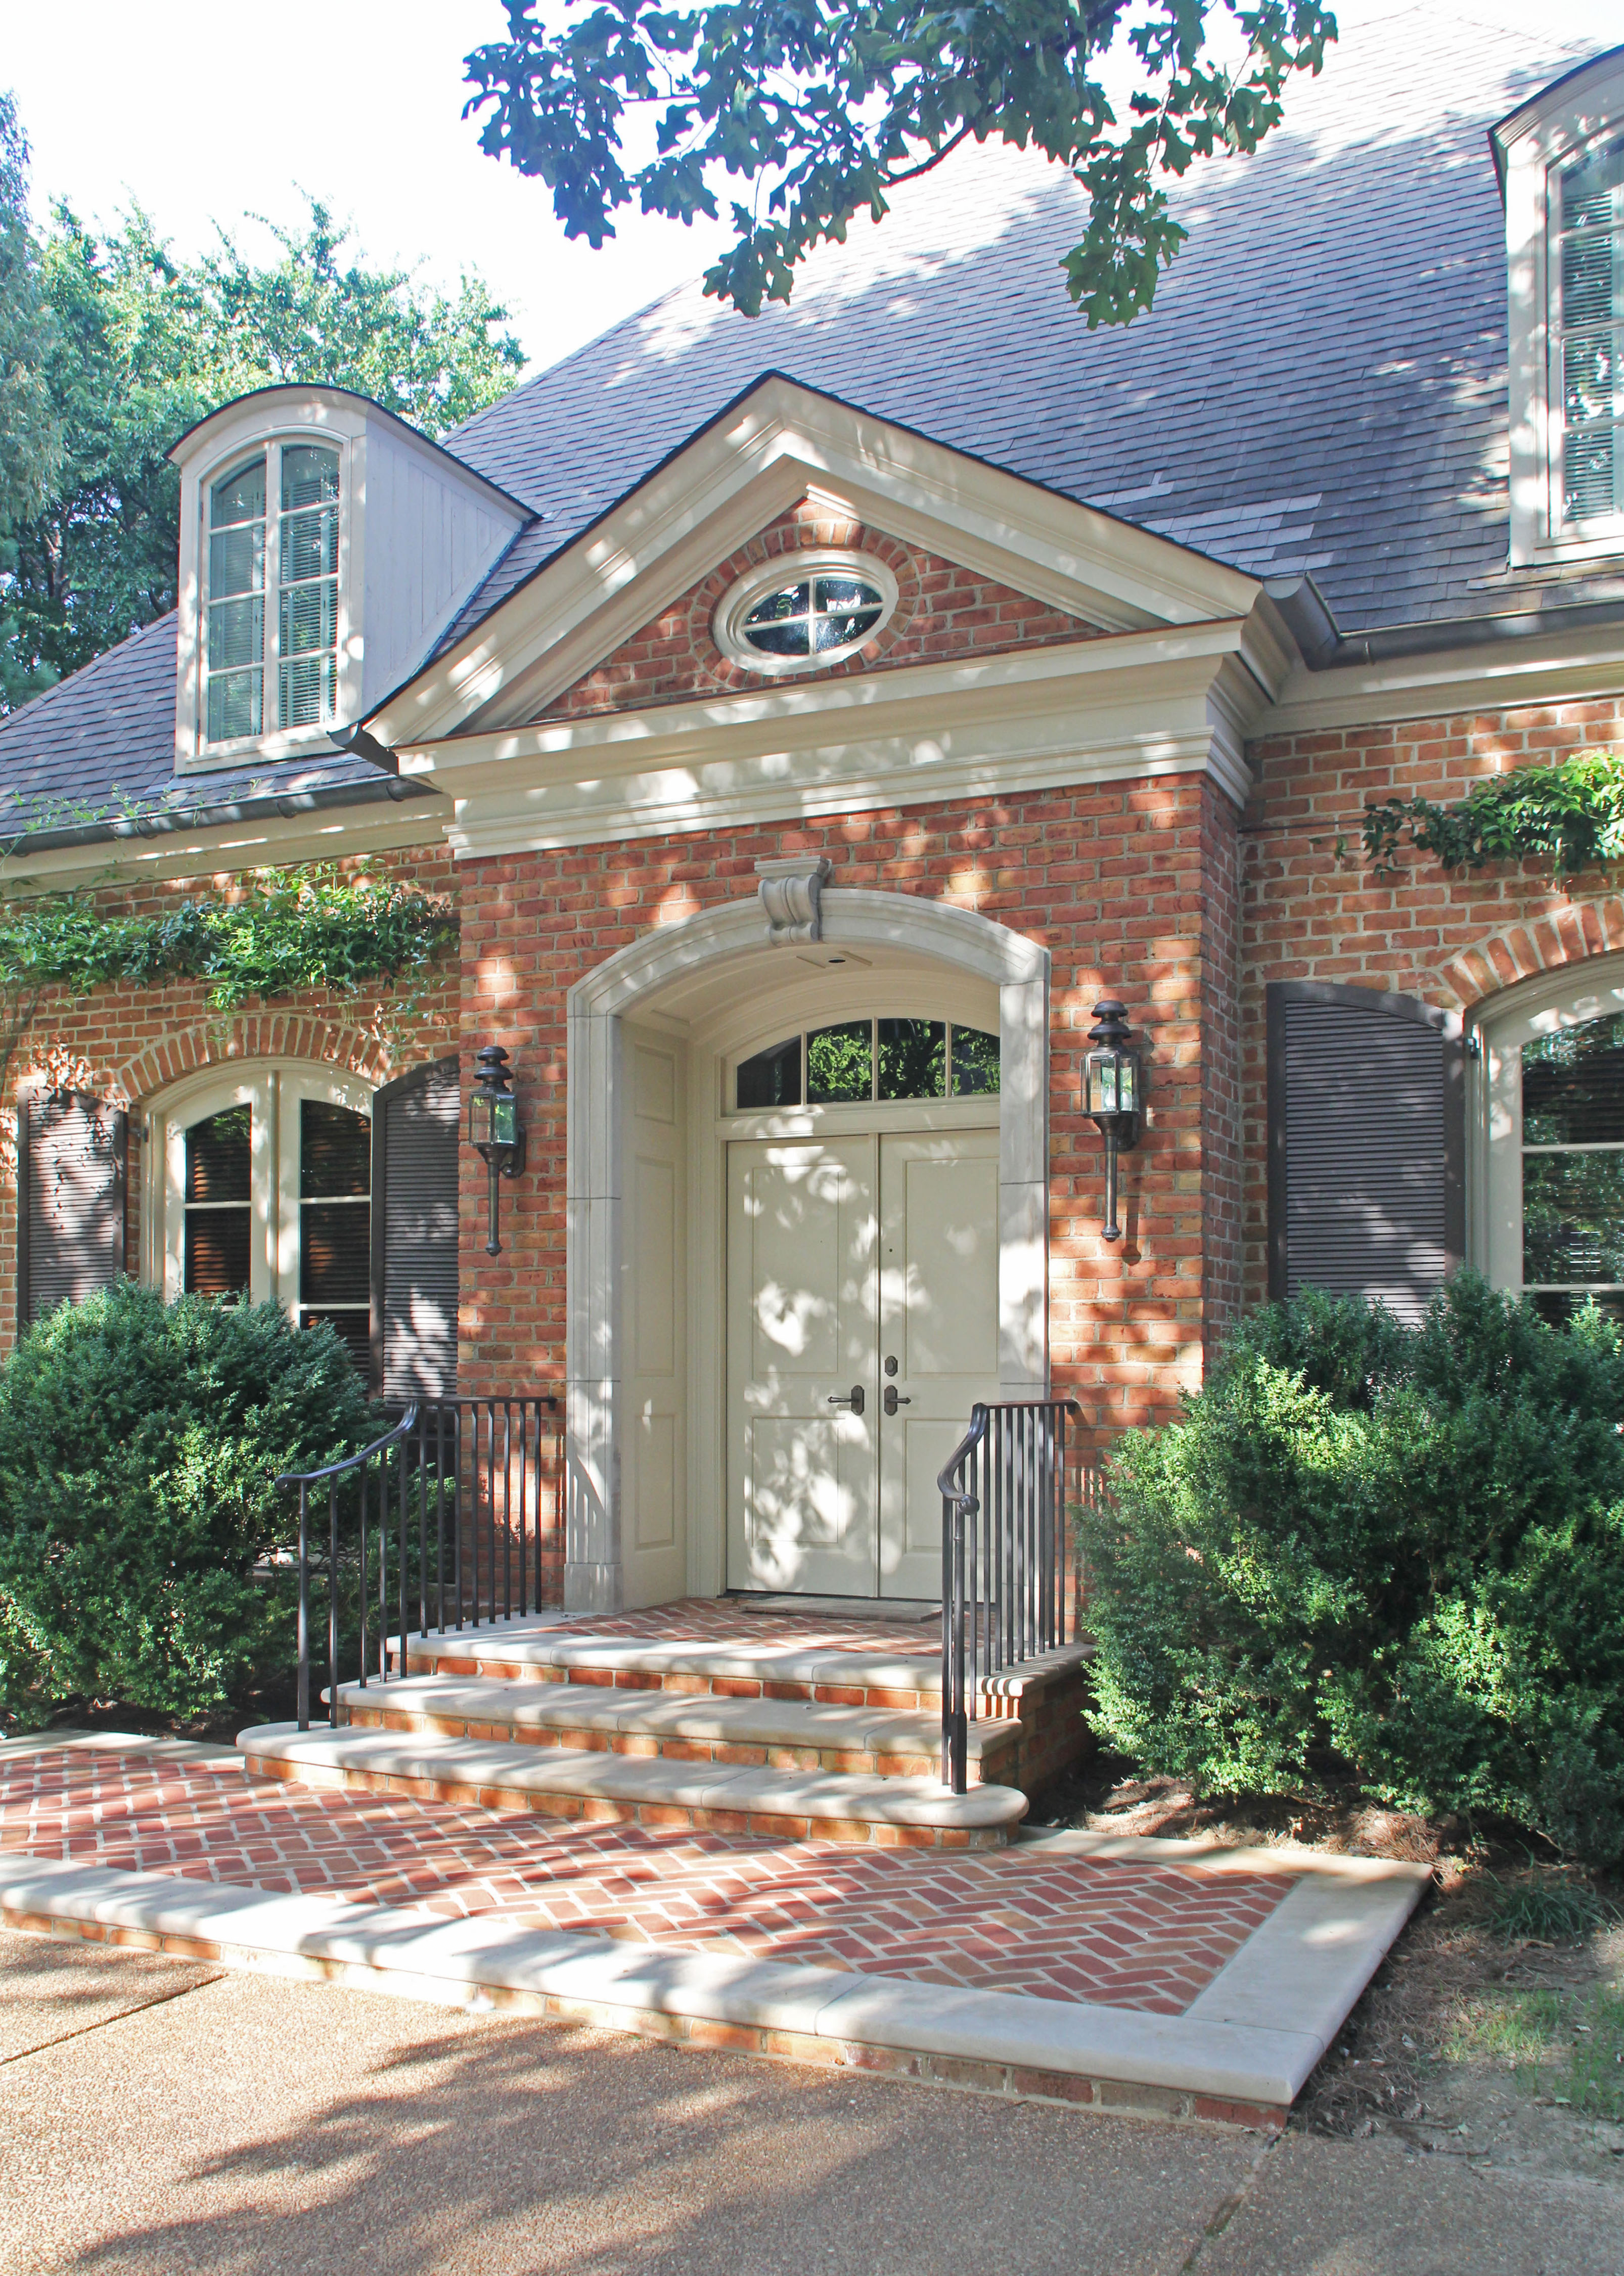 Red brick house with matching driveway, featuring a large white front door.